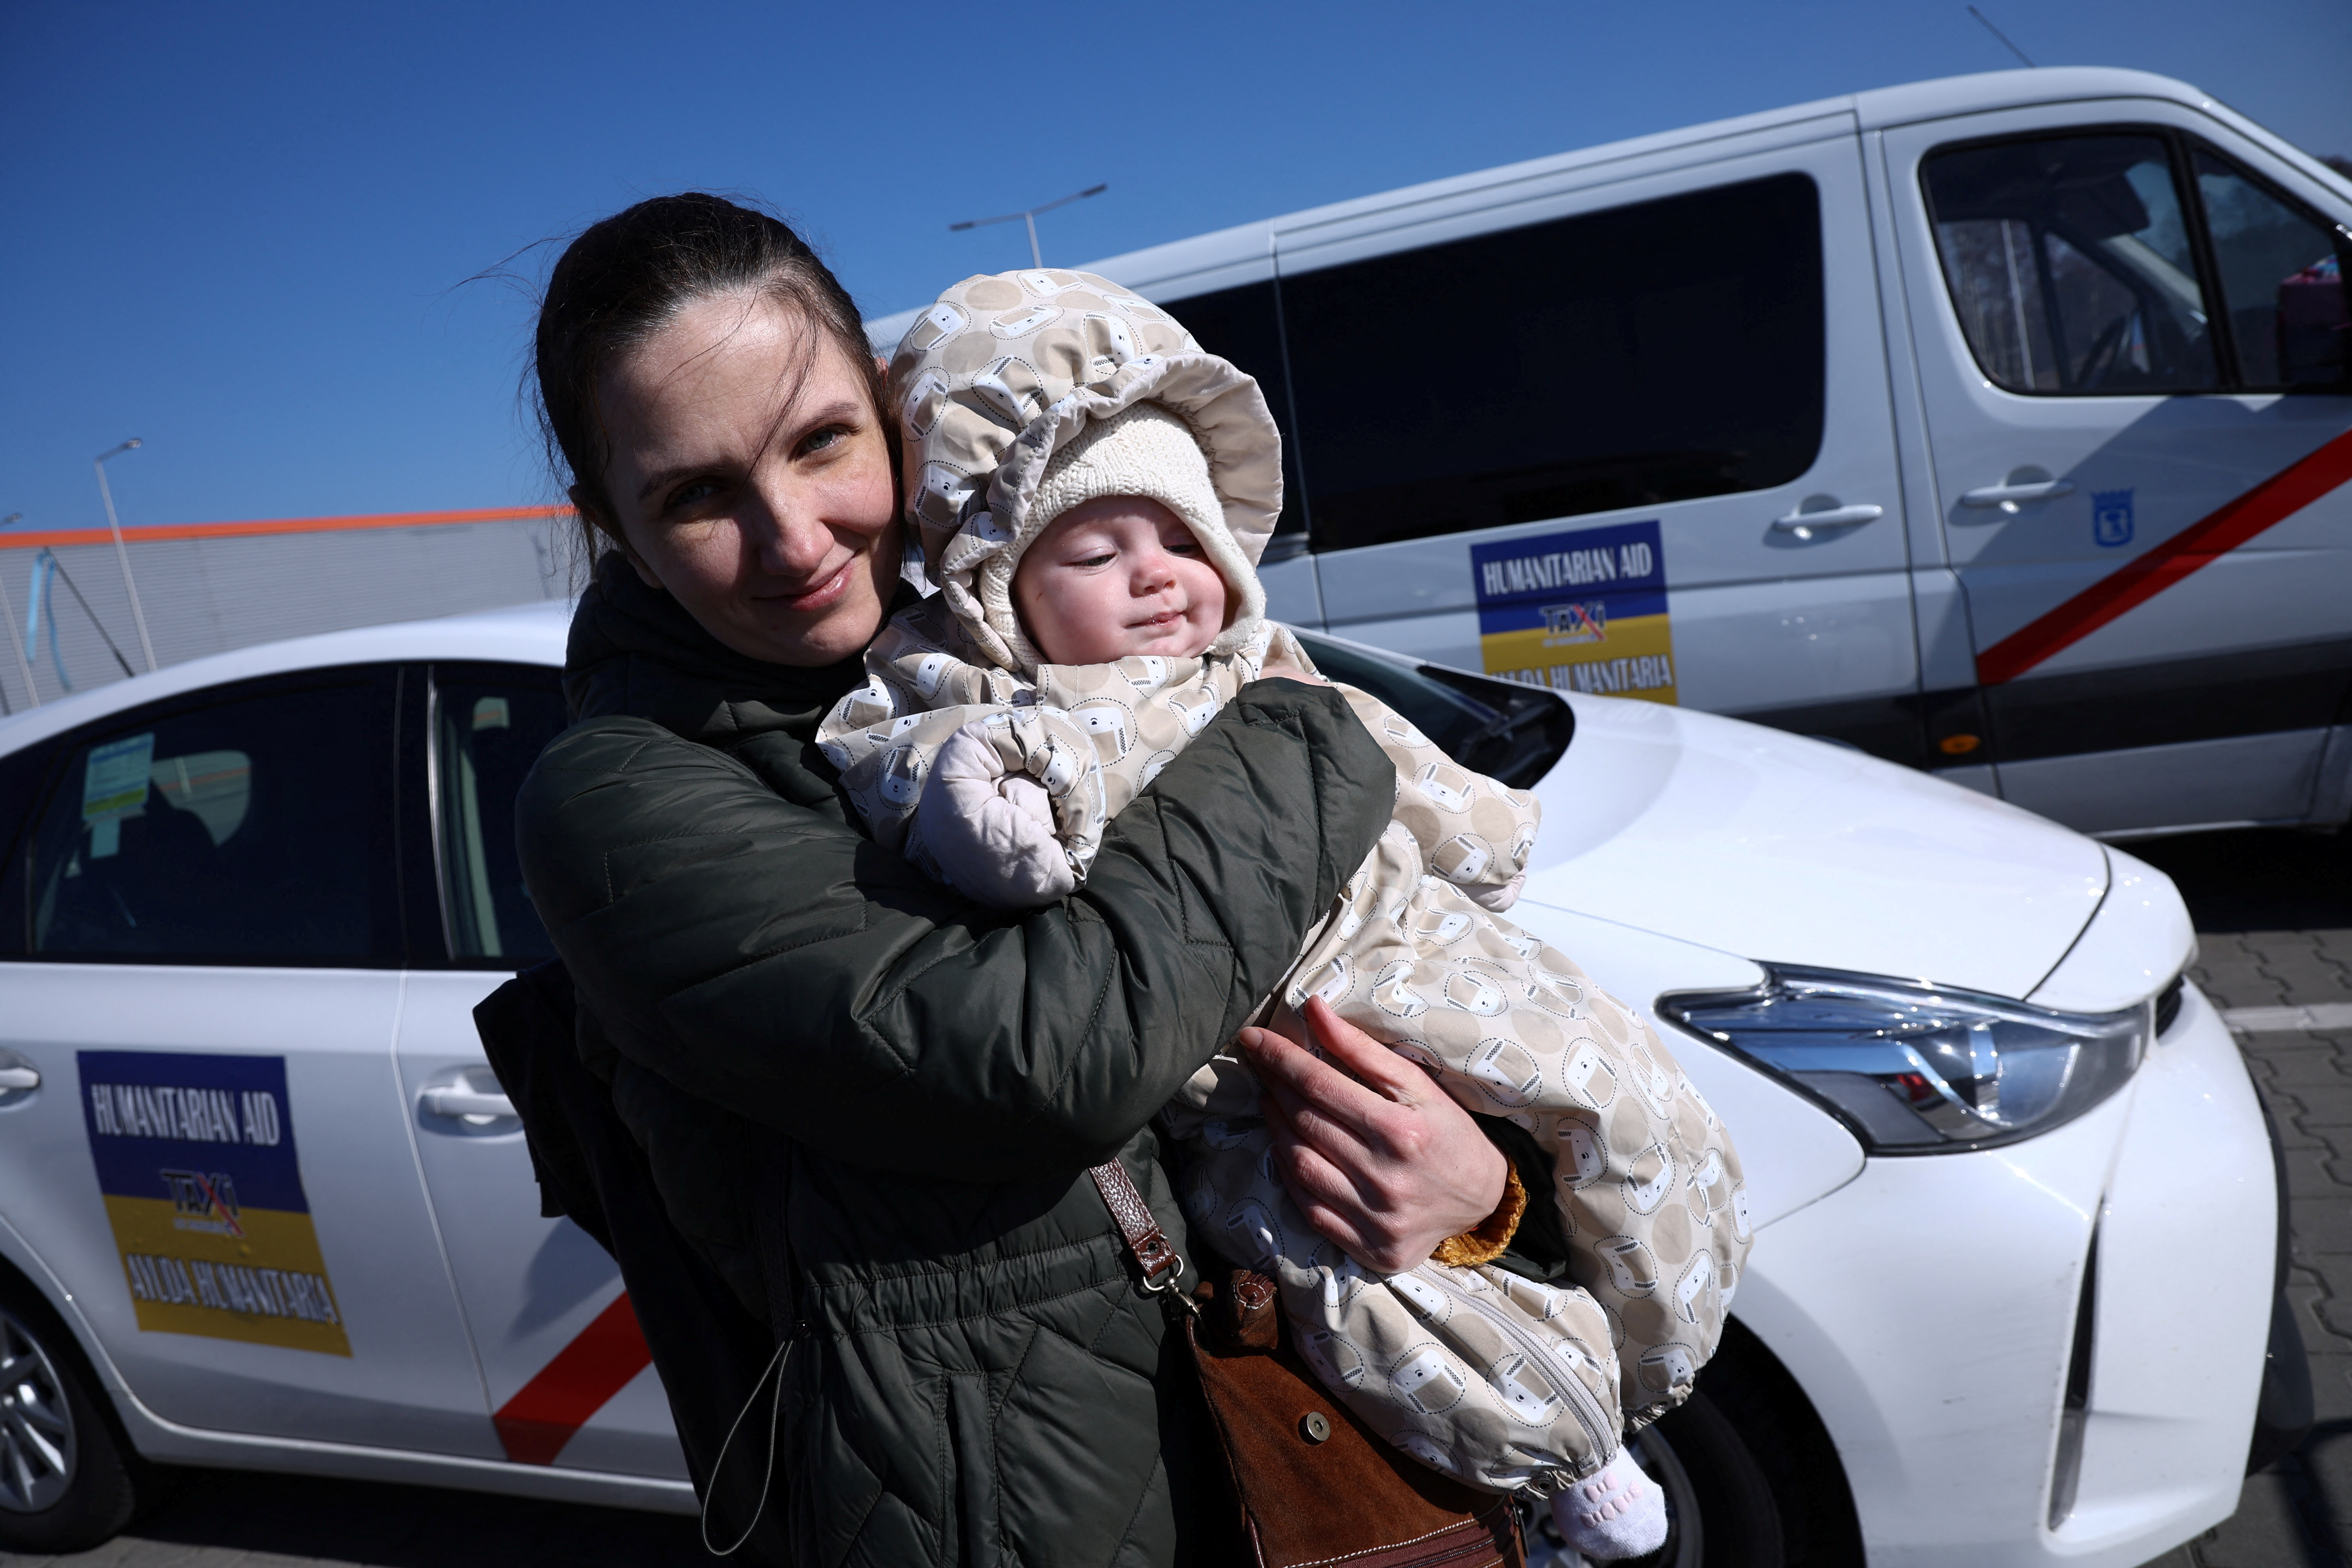 Ukrainian woman Olga, 38, holds her 6-month-old daughter Vera in front of the reception center for refugees, in Nadarzyn